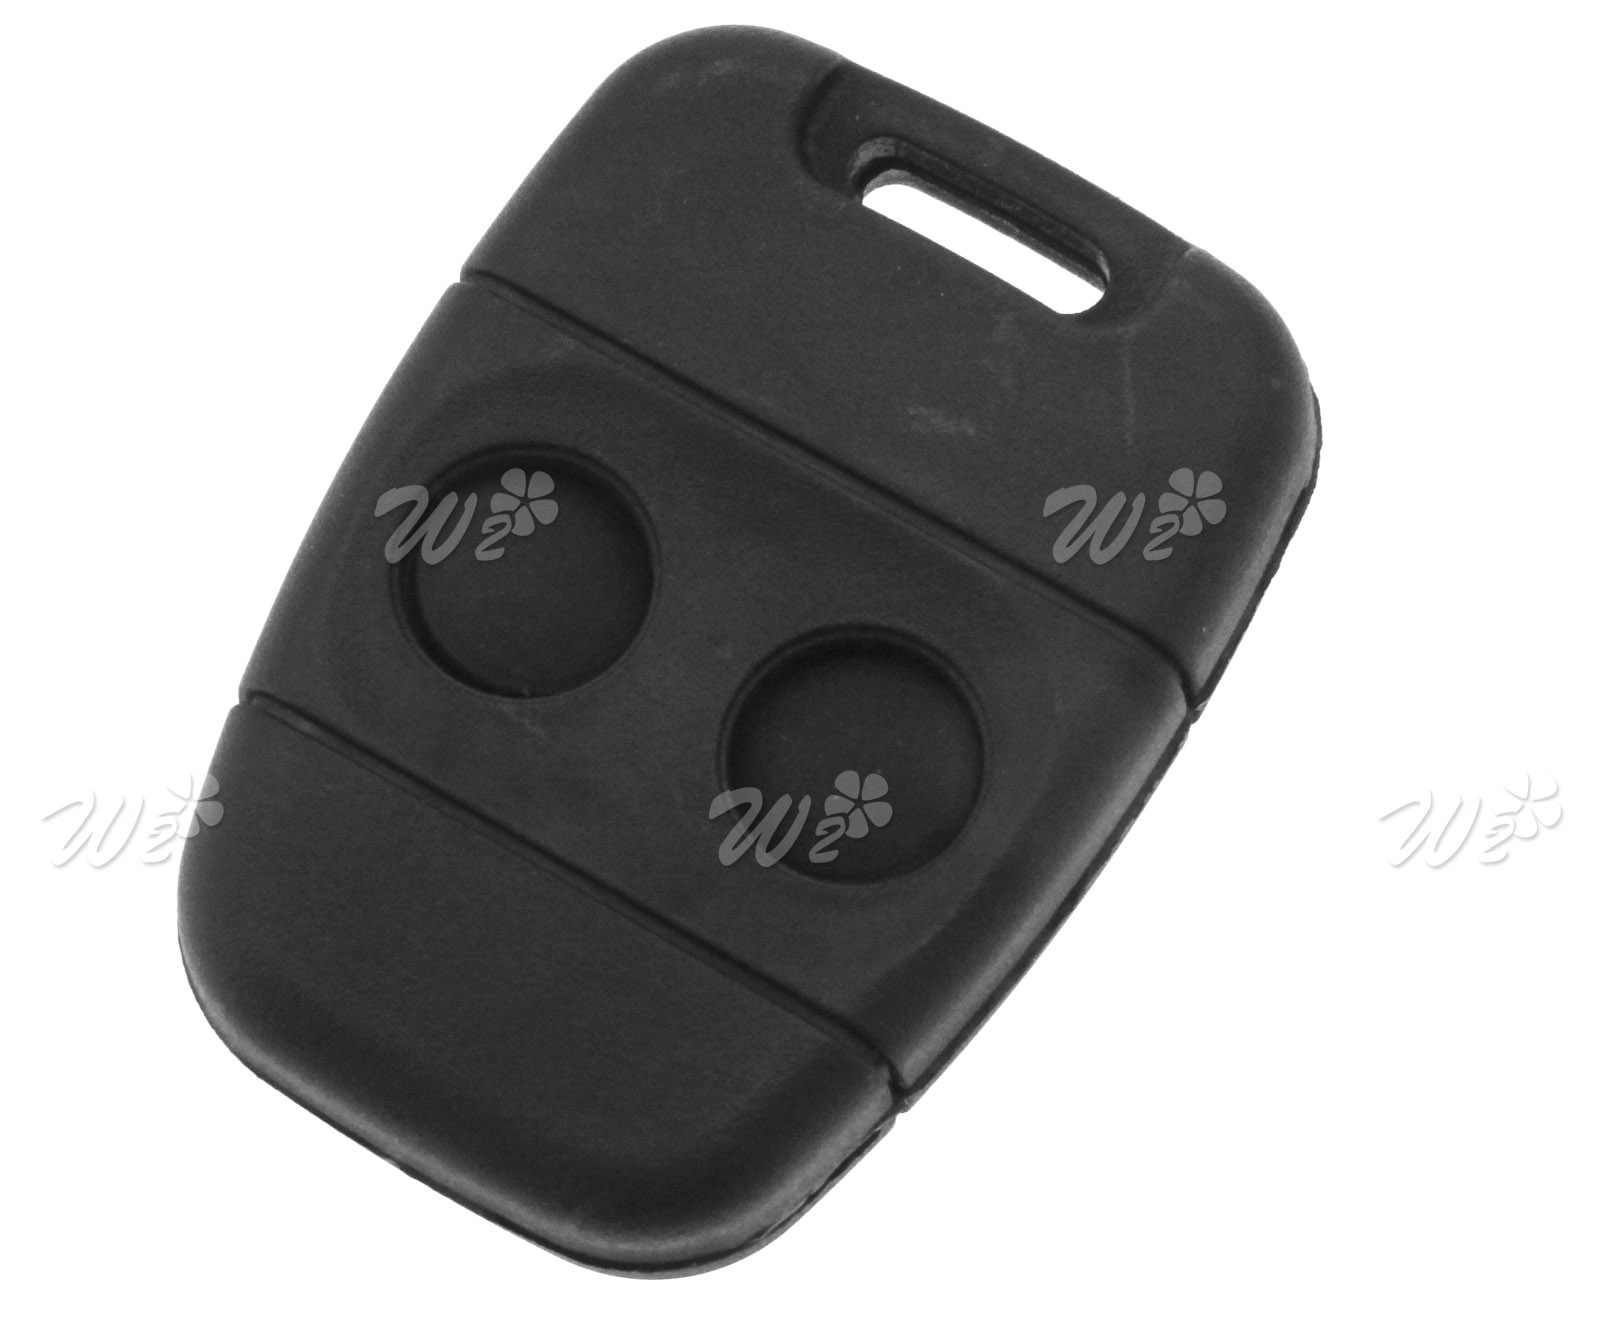 Replacement 5 Button Remote Key Fob Case Shell for Land Rover Freelander 2 Grand